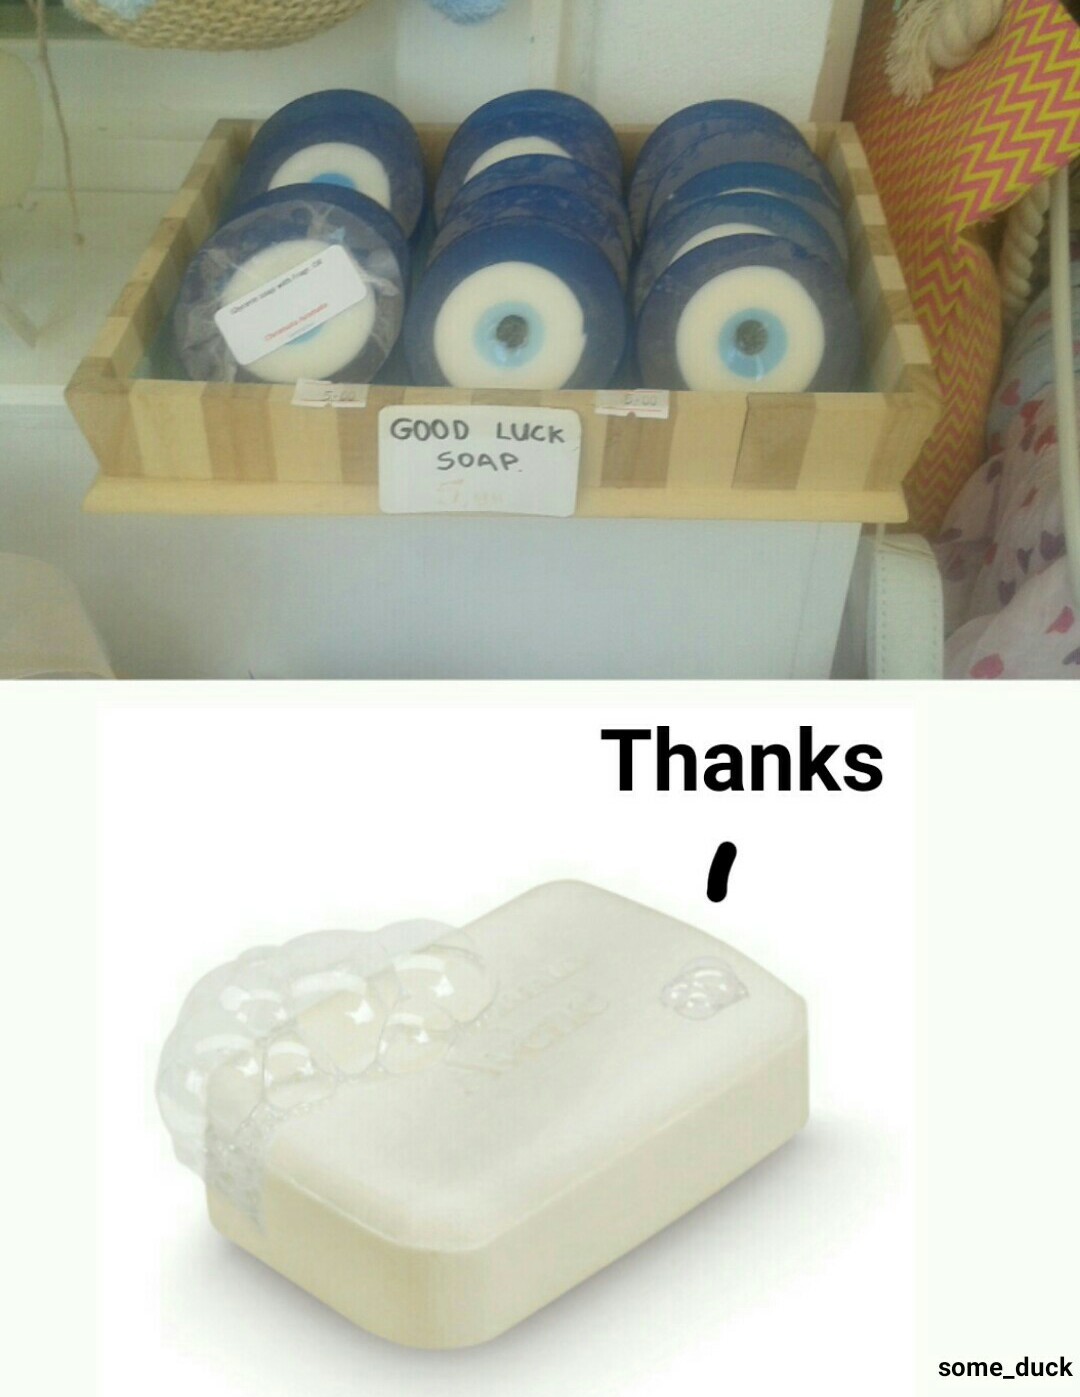 The soap bars resemble evil eye talismans which are believed to protect against a curse that is called the evil eye curse. Not confusing at all. - meme